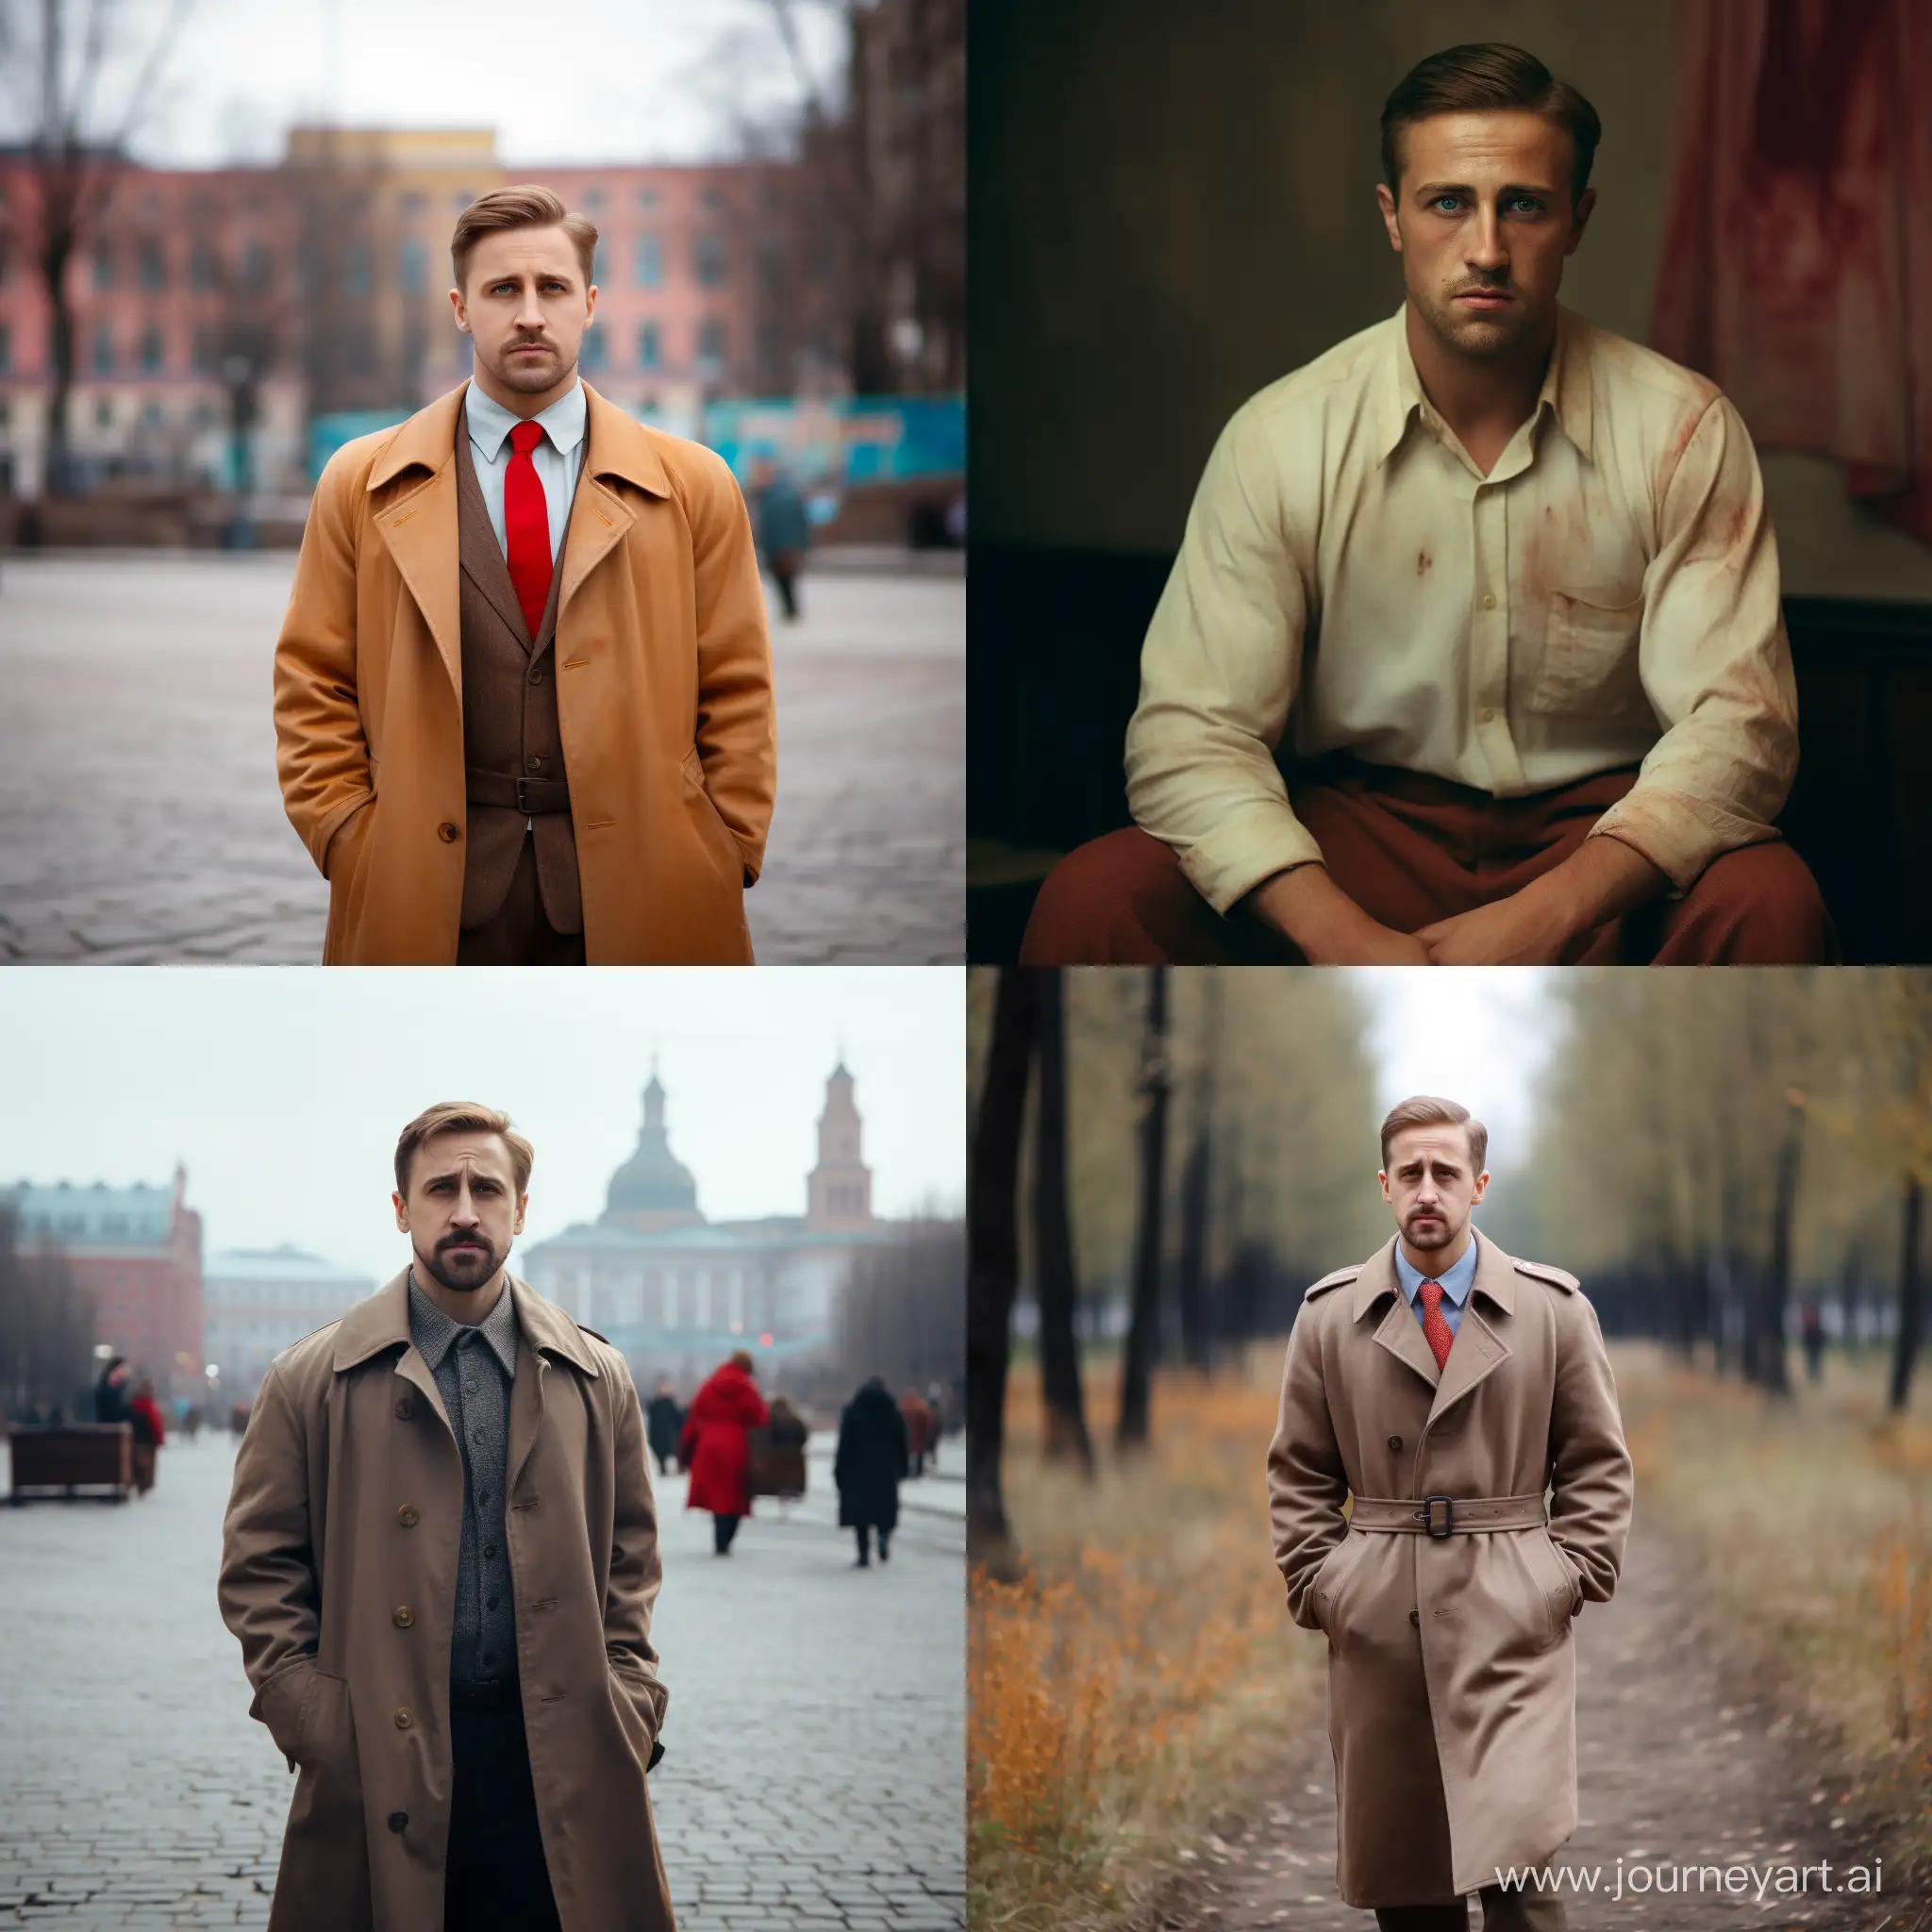 Ryan-Gosling-Captures-Gritty-Realism-in-USSR-A-Tale-of-Resilience-and-Struggle